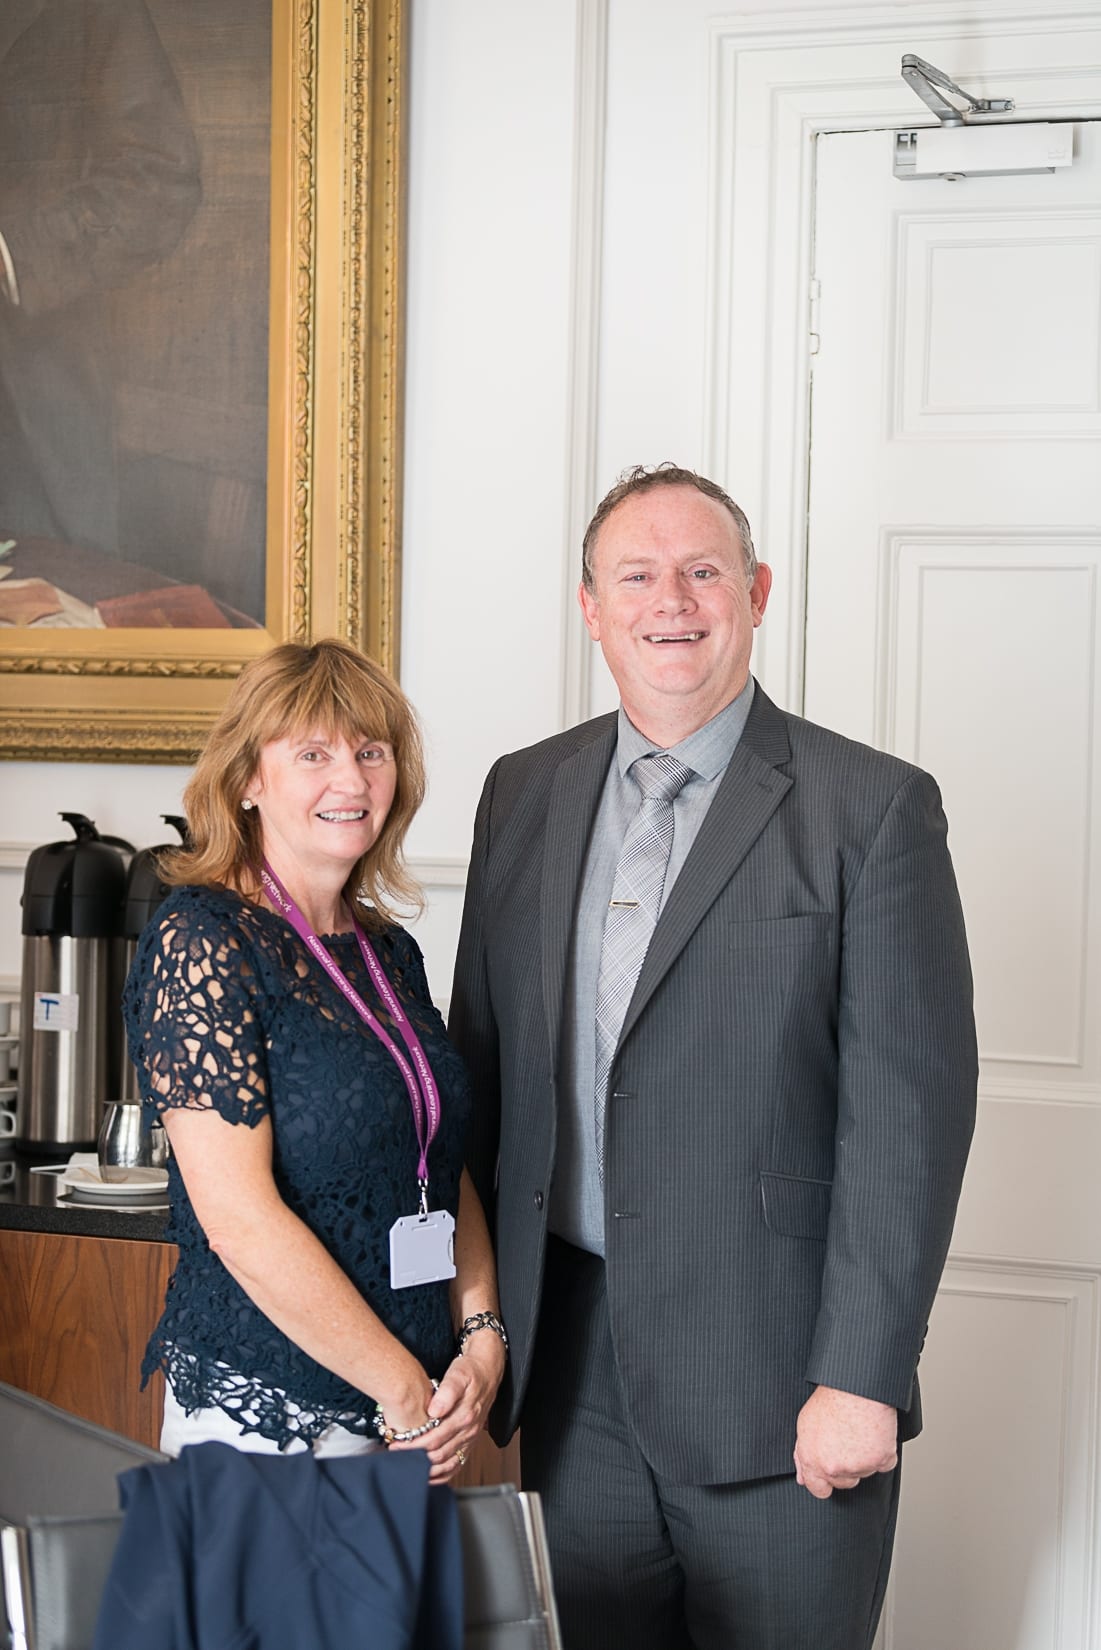 Maximise your Membership Event which took place in the Limerick Chamber Boardroom on the 11th September 2019. From left to right: Katherine Maher - National Learning Network, Kenneth Blowers - Magnet Networks.